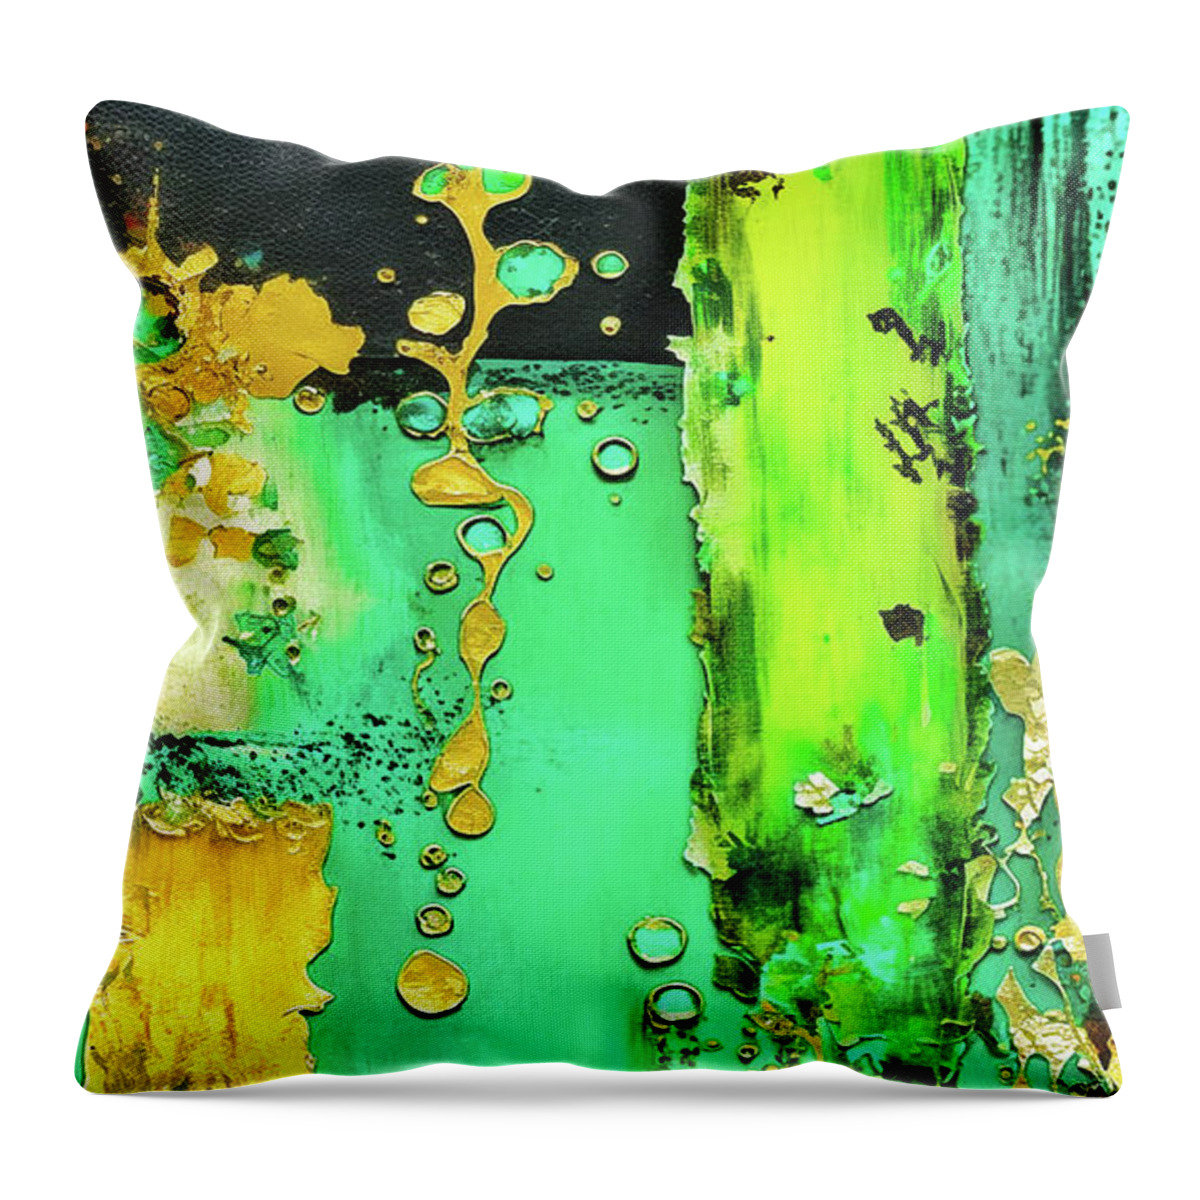 Torn Throw Pillow featuring the mixed media Nebula Nectar by Glenn Robins